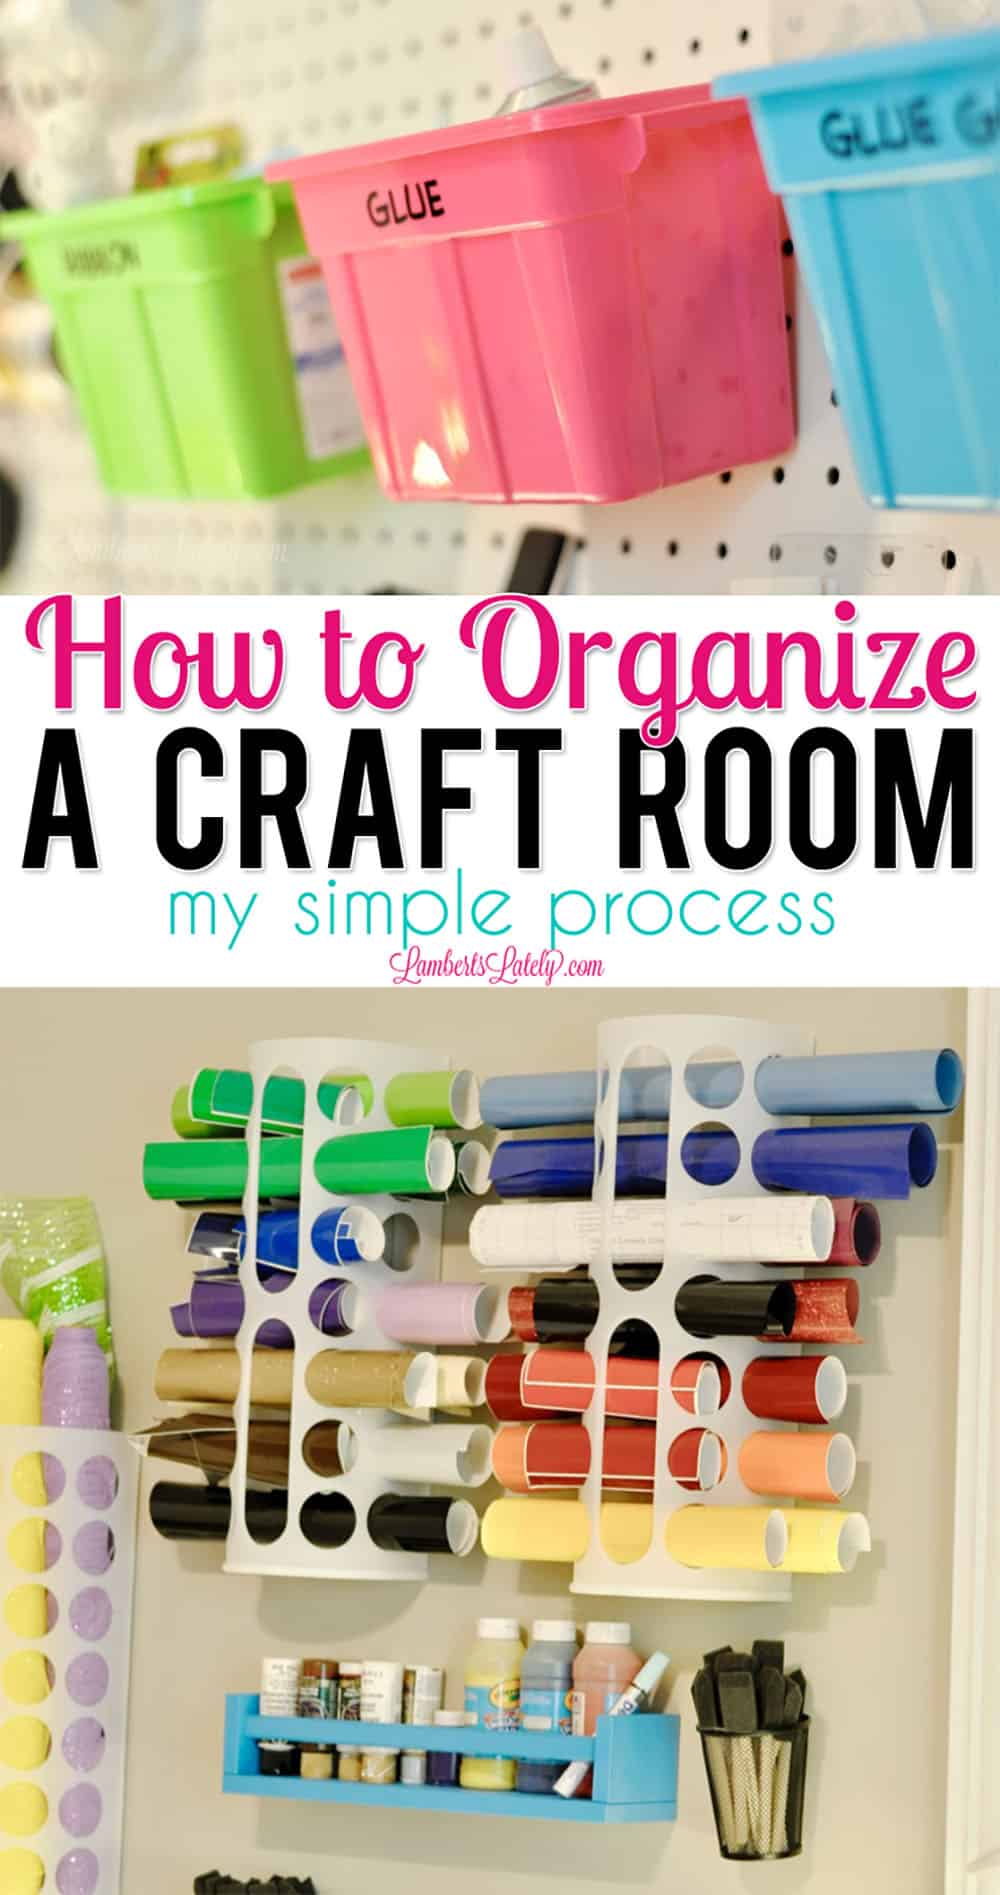 This post is full of great ideas for how to organize a craft room on any budget. See how to make new and old organization tools (including dollar store finds) into useful tools for small spaces.